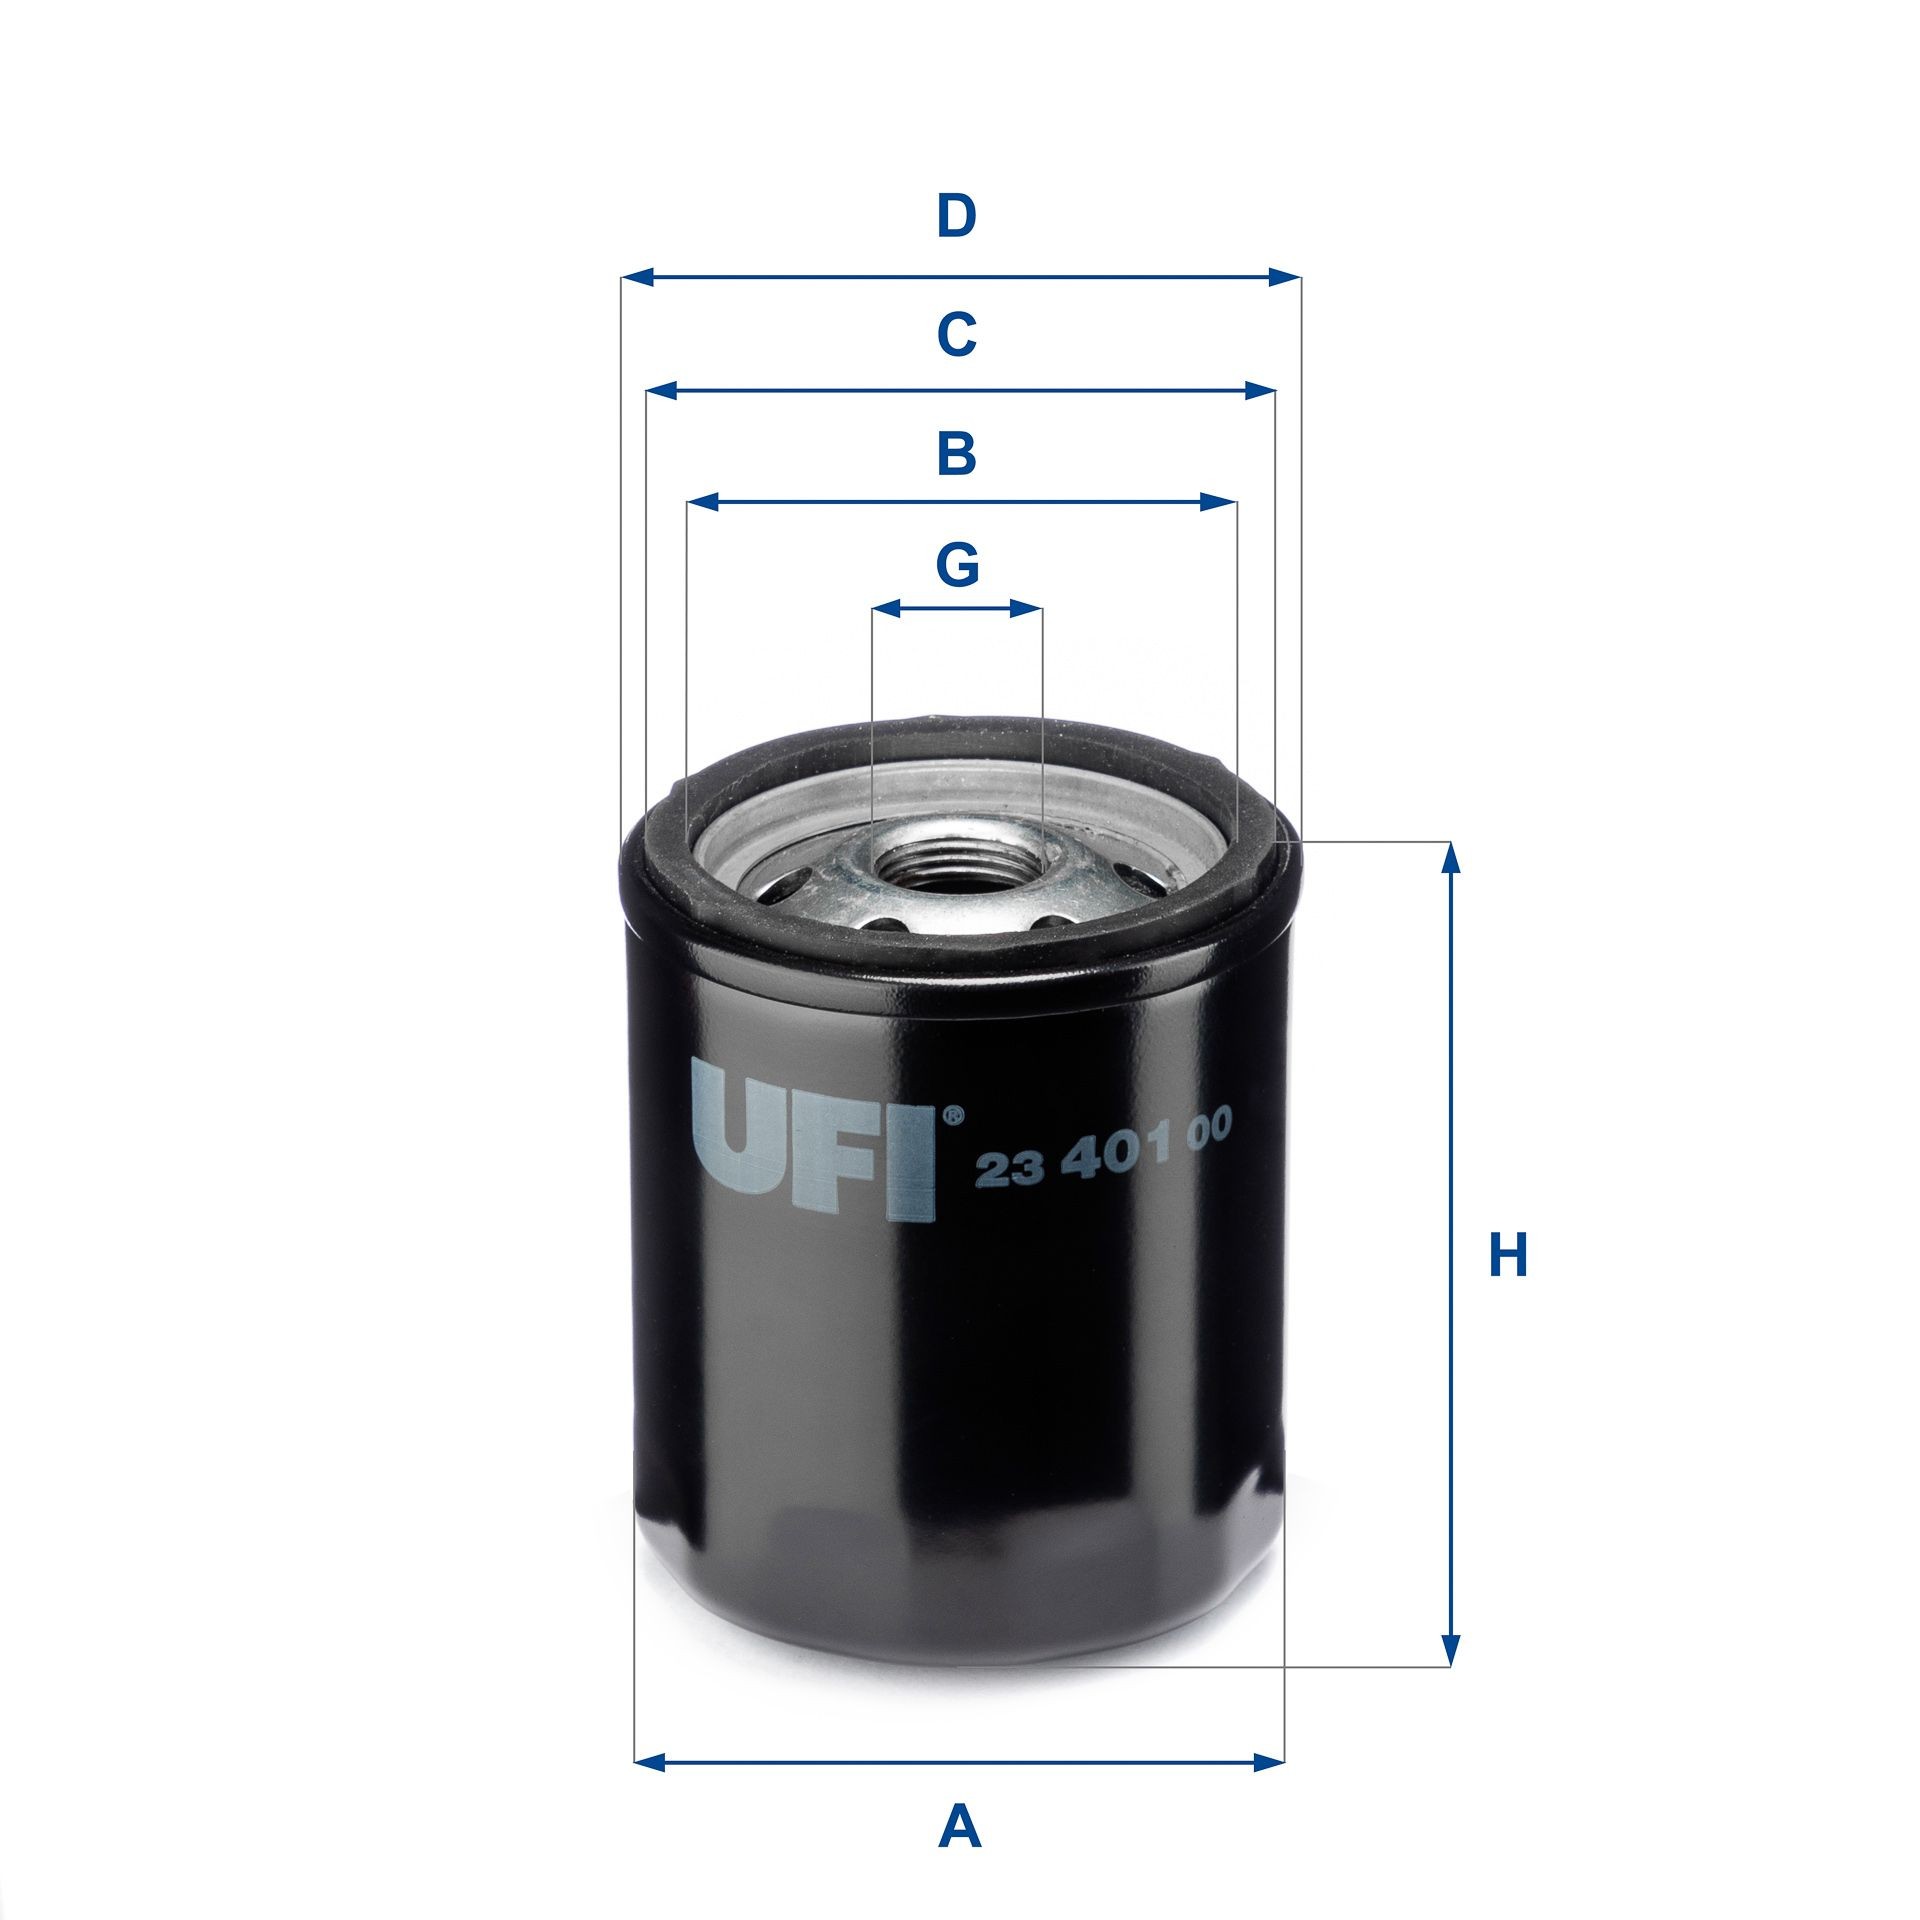 UFI M 20 X 1,5, with one anti-return valve, Spin-on Filter Inner Diameter 2: 61mm, Outer Diameter 2: 71mm, Ø: 76, 78mm, Height: 92mm Oil filters 23.401.00 buy